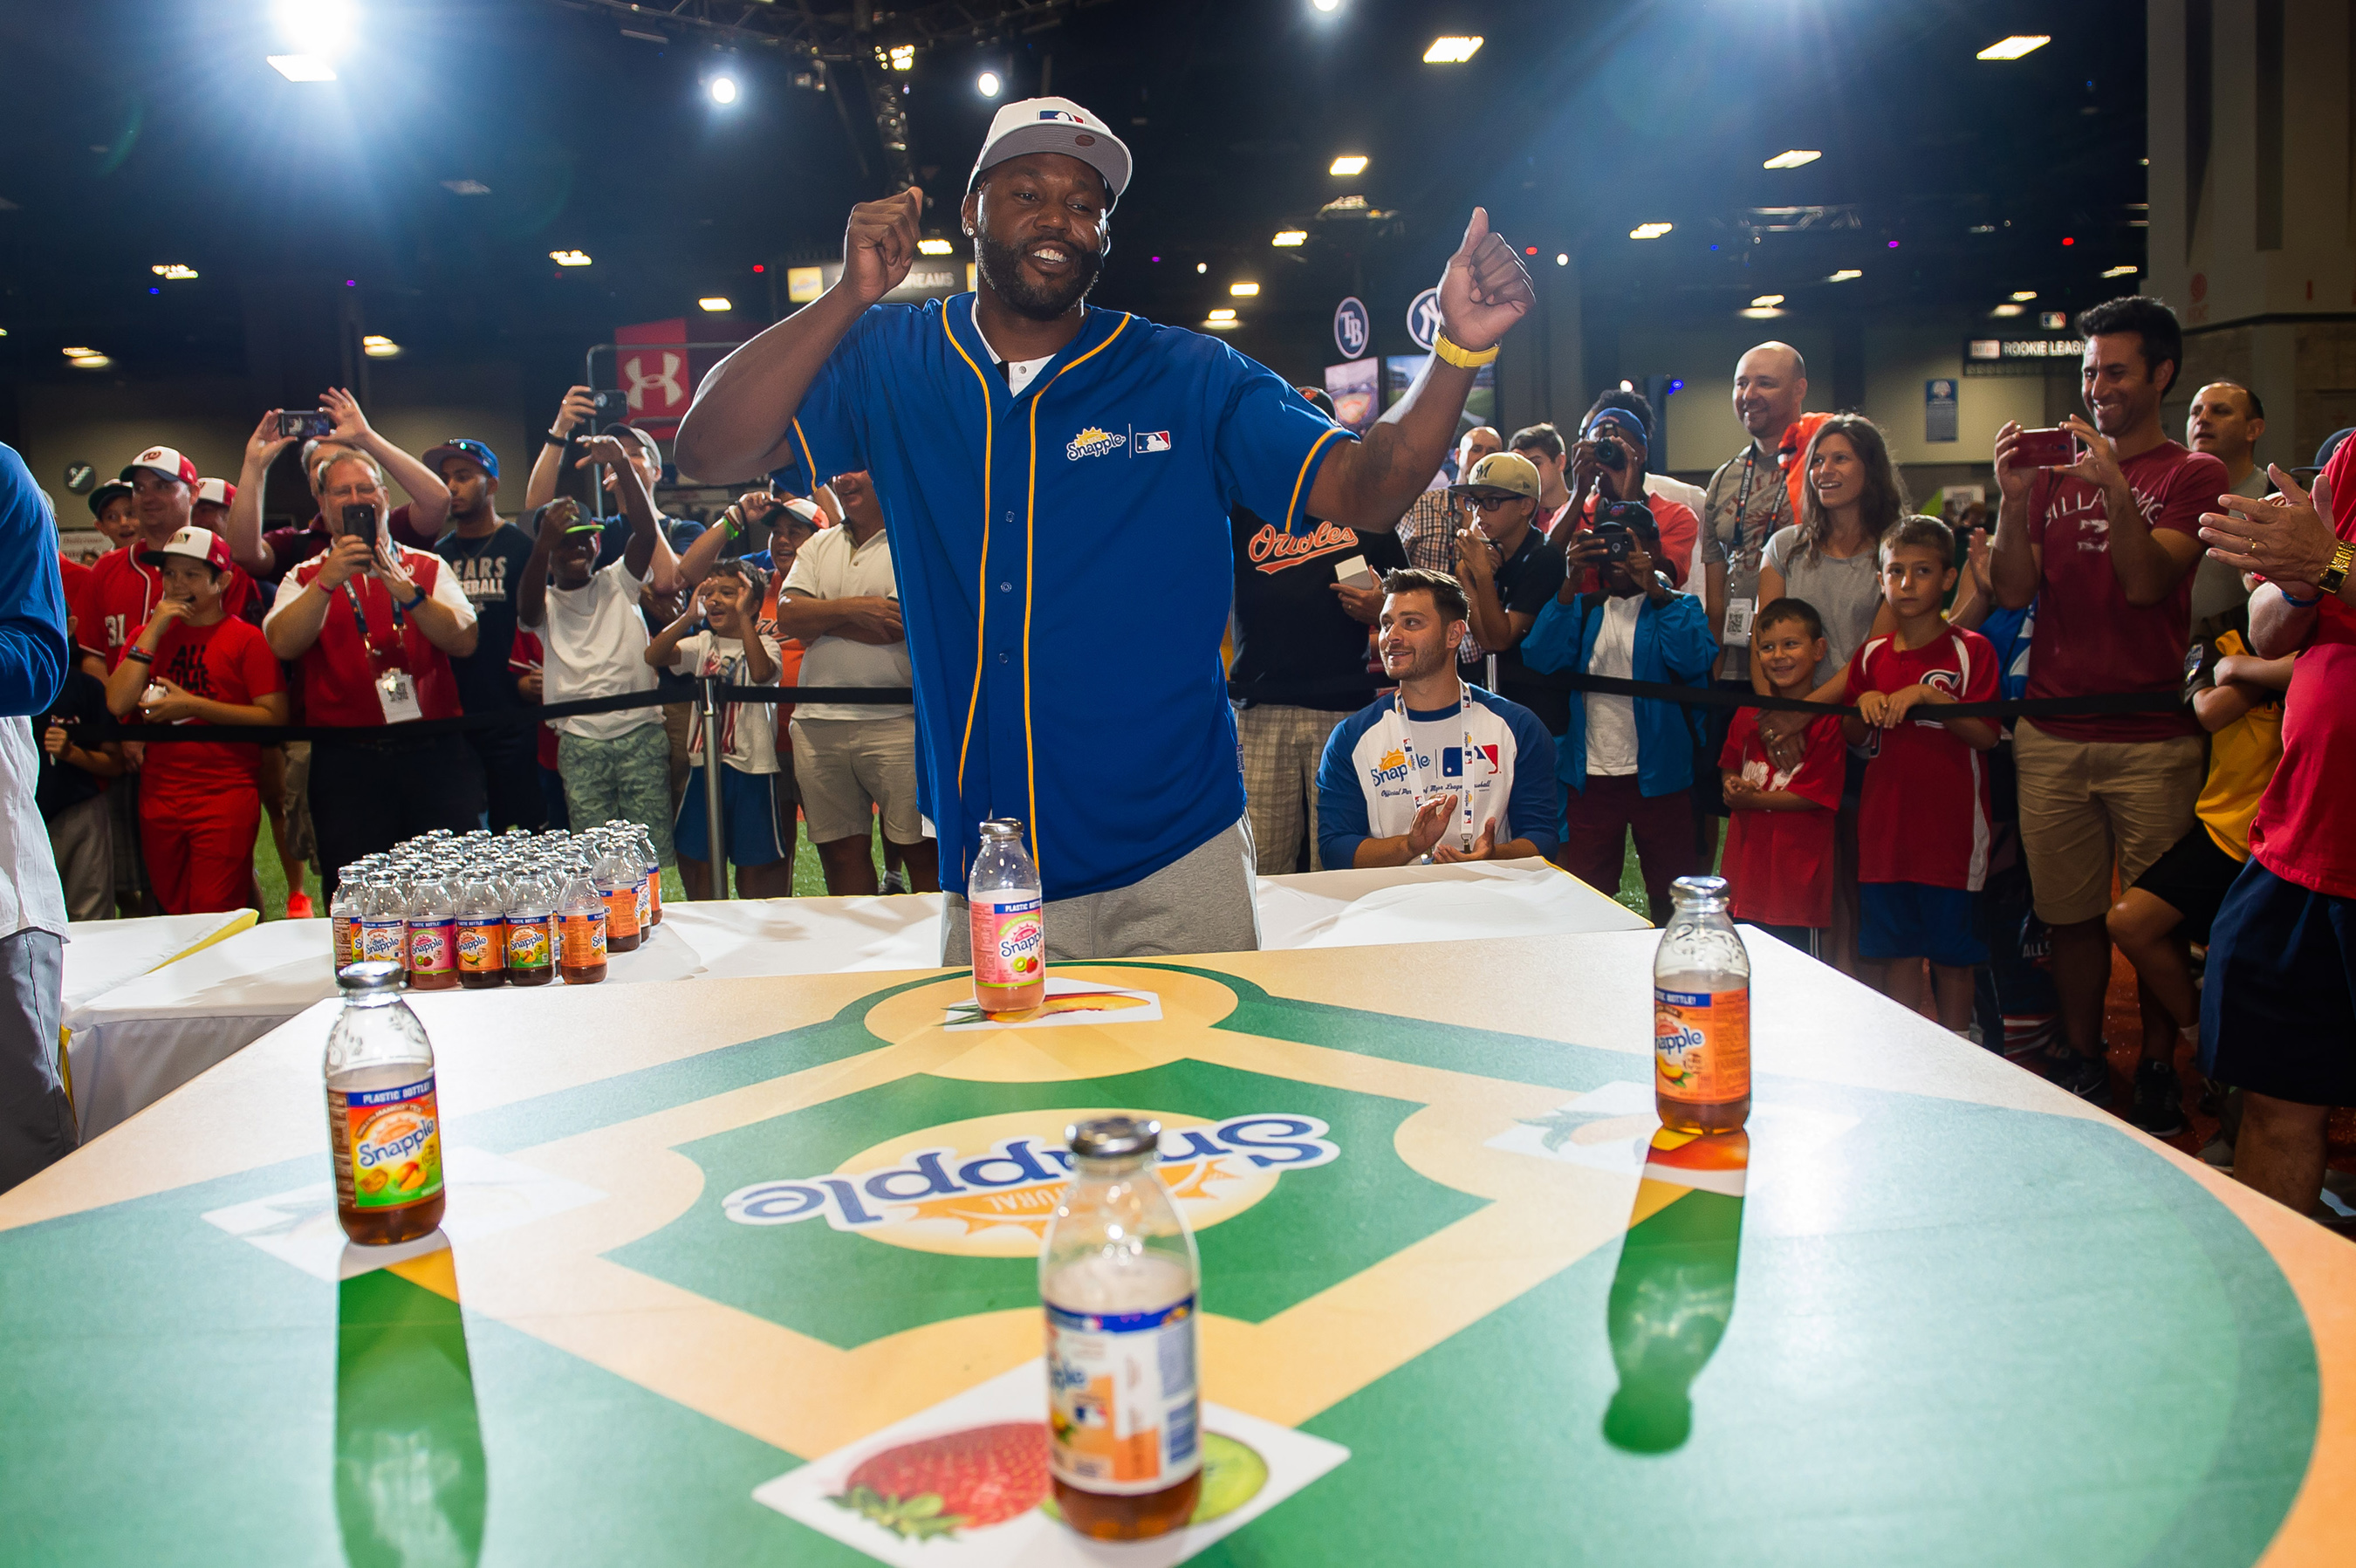 Cliff Floyd won Snapple’s first-ever All-Star Bottle Flip Challenge at MLB FanFest where he competed against Cal Ripken Jr. for the prestigious “Flip for Flavor” champion title on Tuesday, July 17 in Washington.